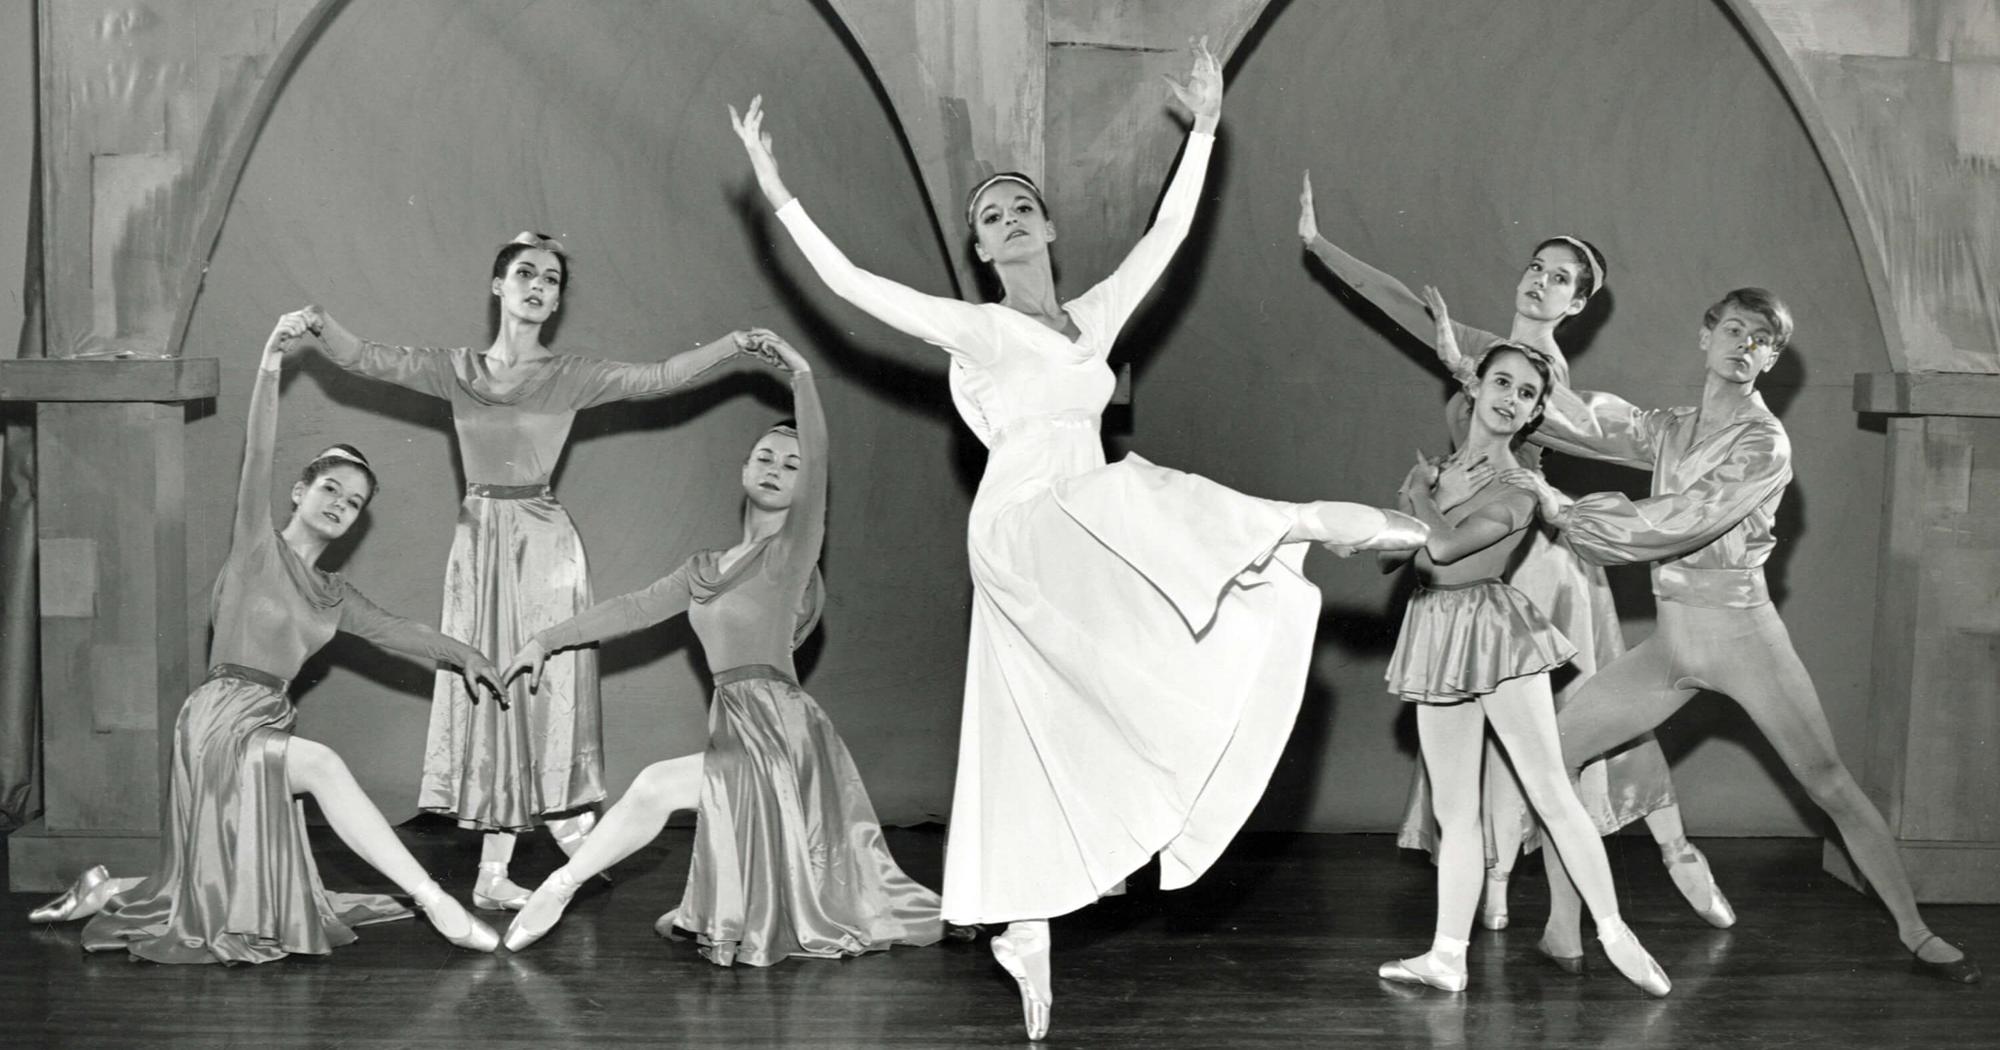 Black and white image depicts ballet in the 1960s. 